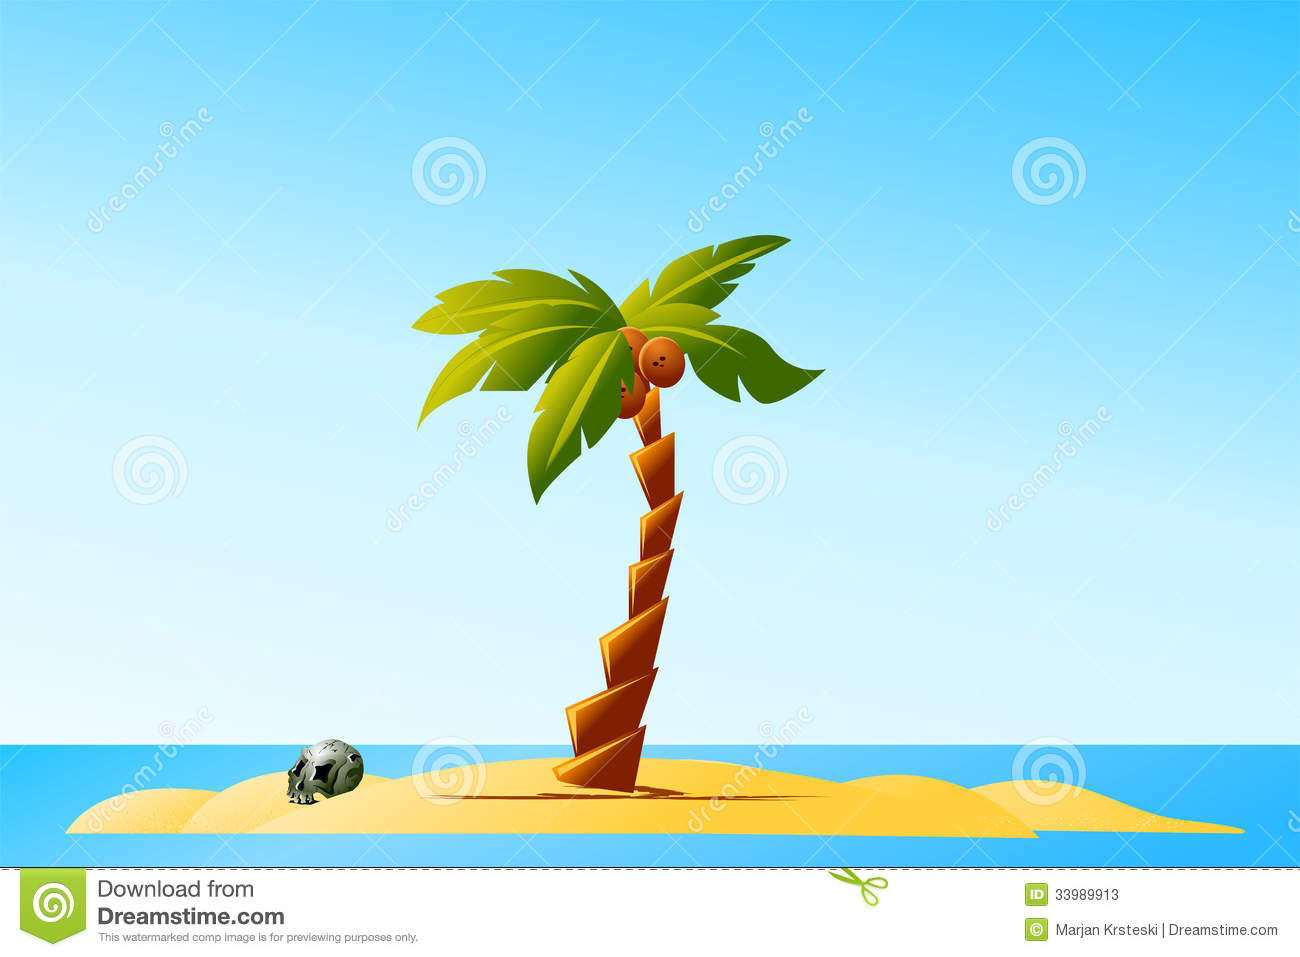 Deserted Island With Skull And Palm Tree 